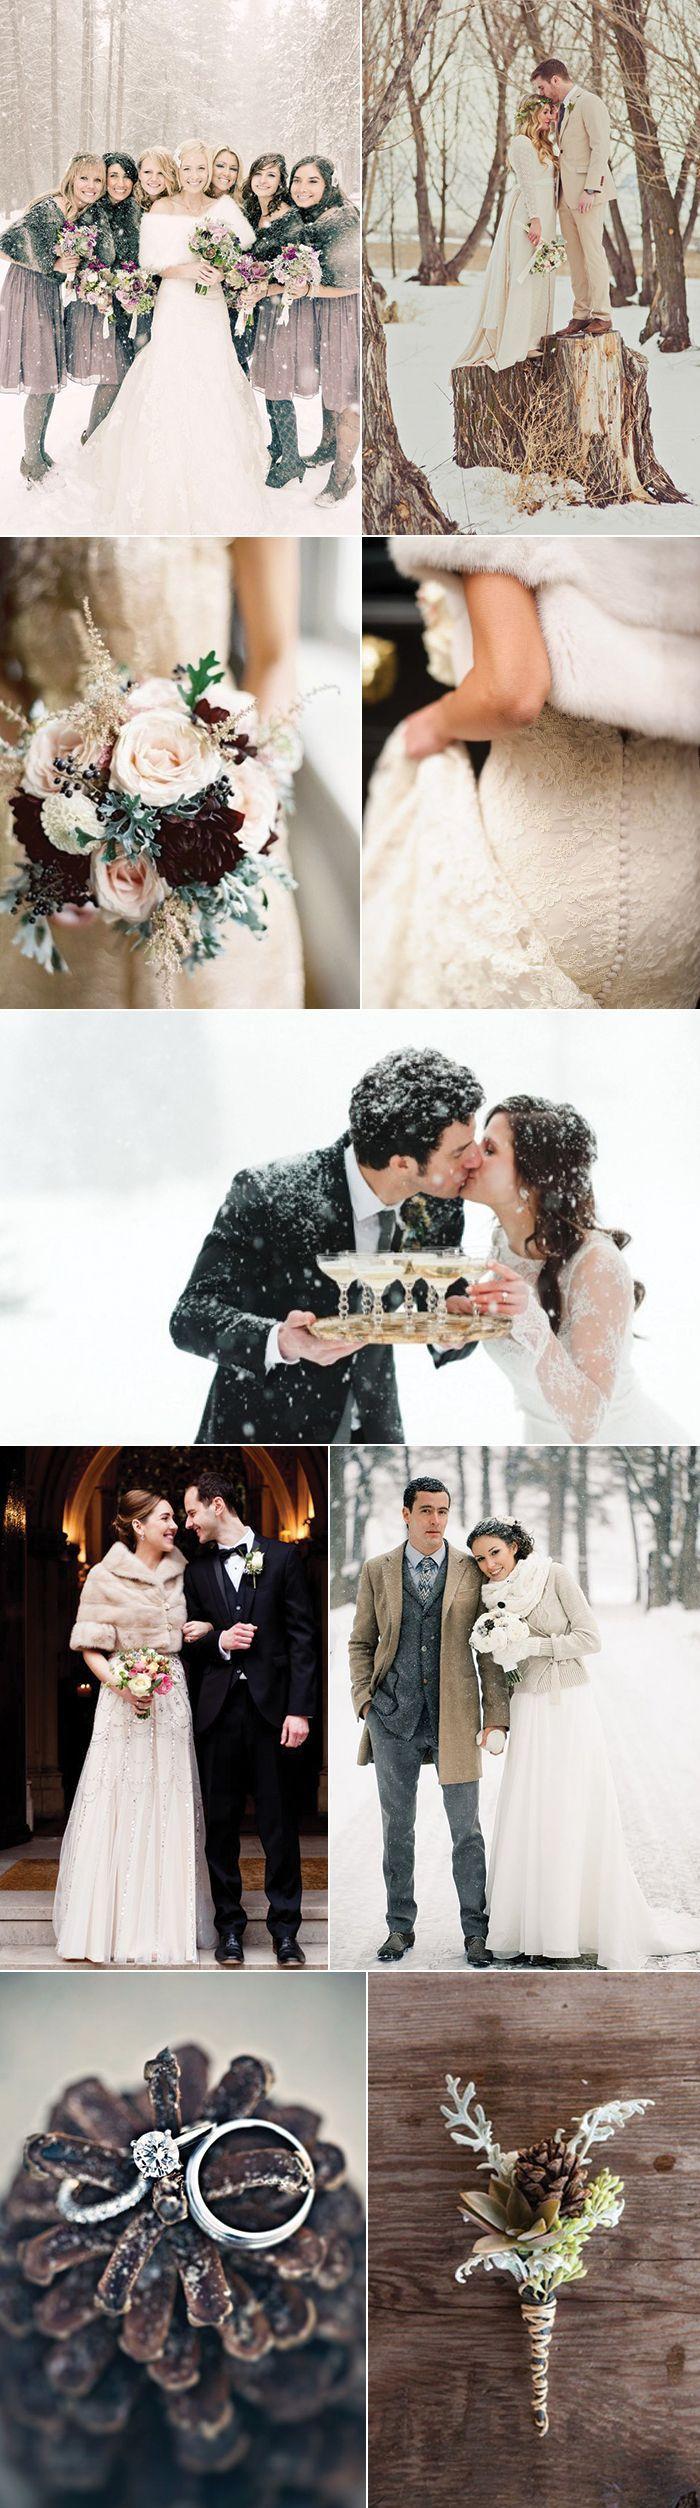 Wedding - 2015 Fall And Winter Wedding Trends